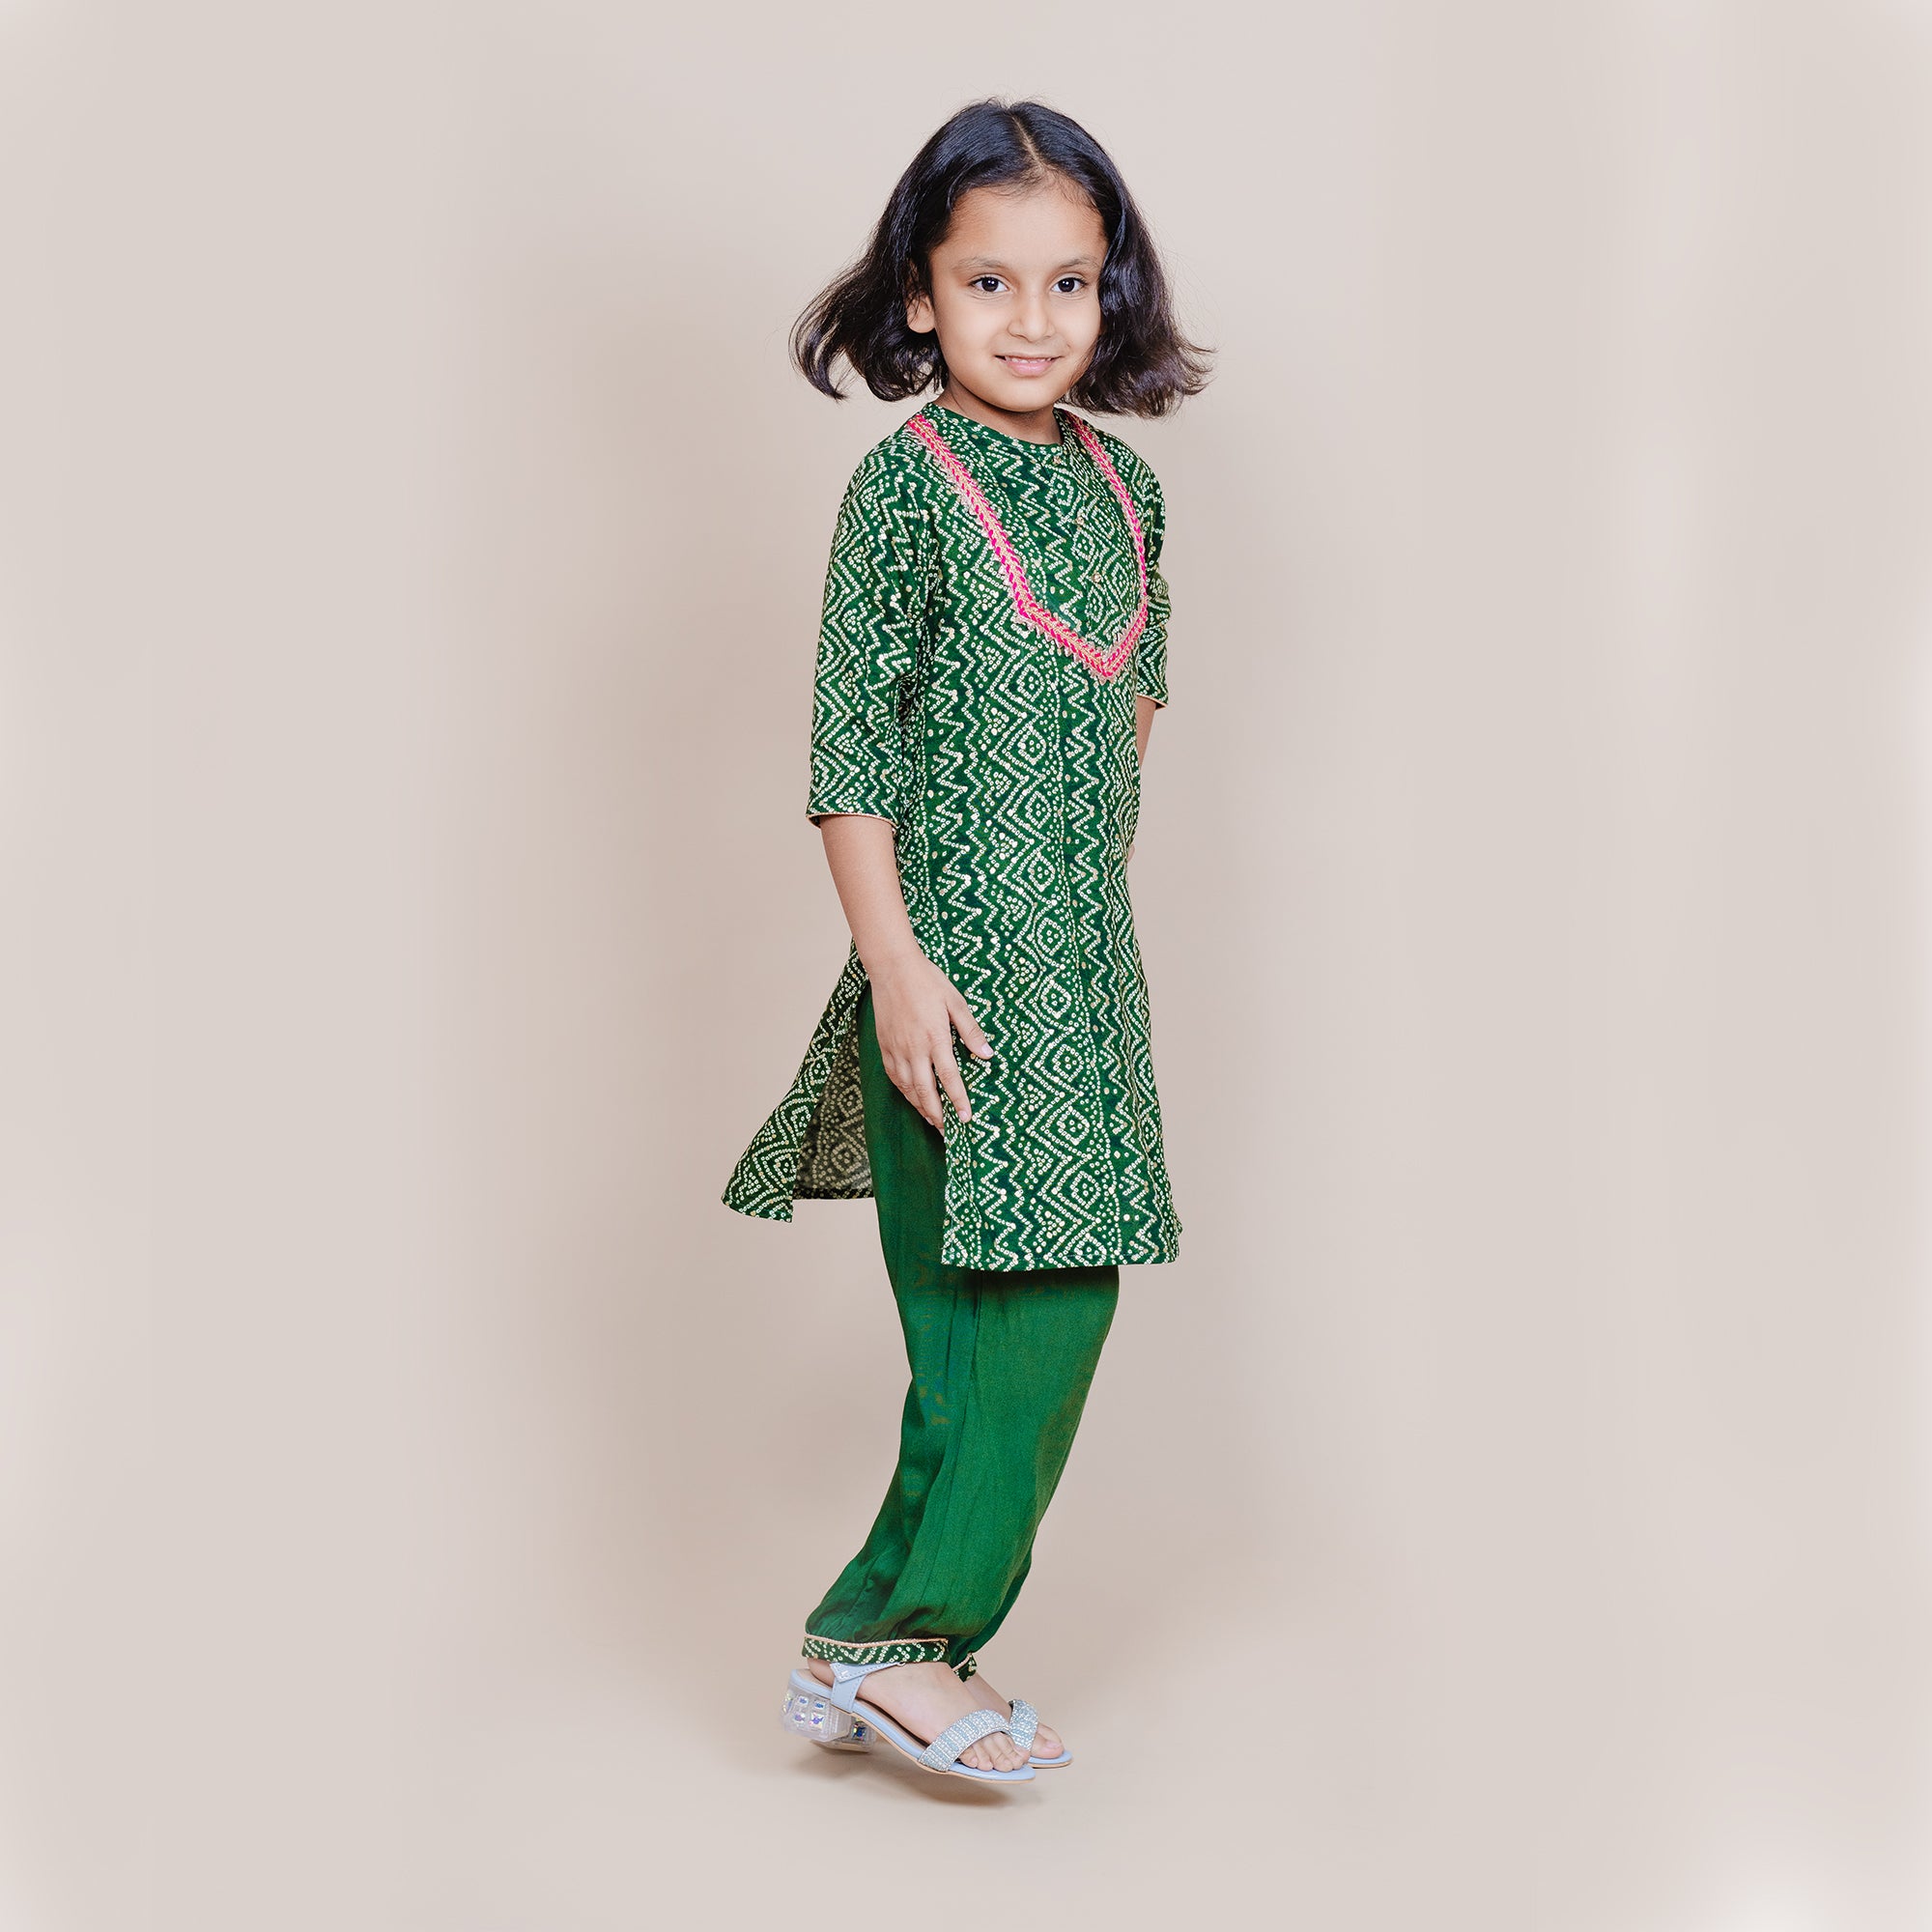 Exquisite Bandhej Rayon Kurta with Gotta Detailing Paired with Harem Pants Set